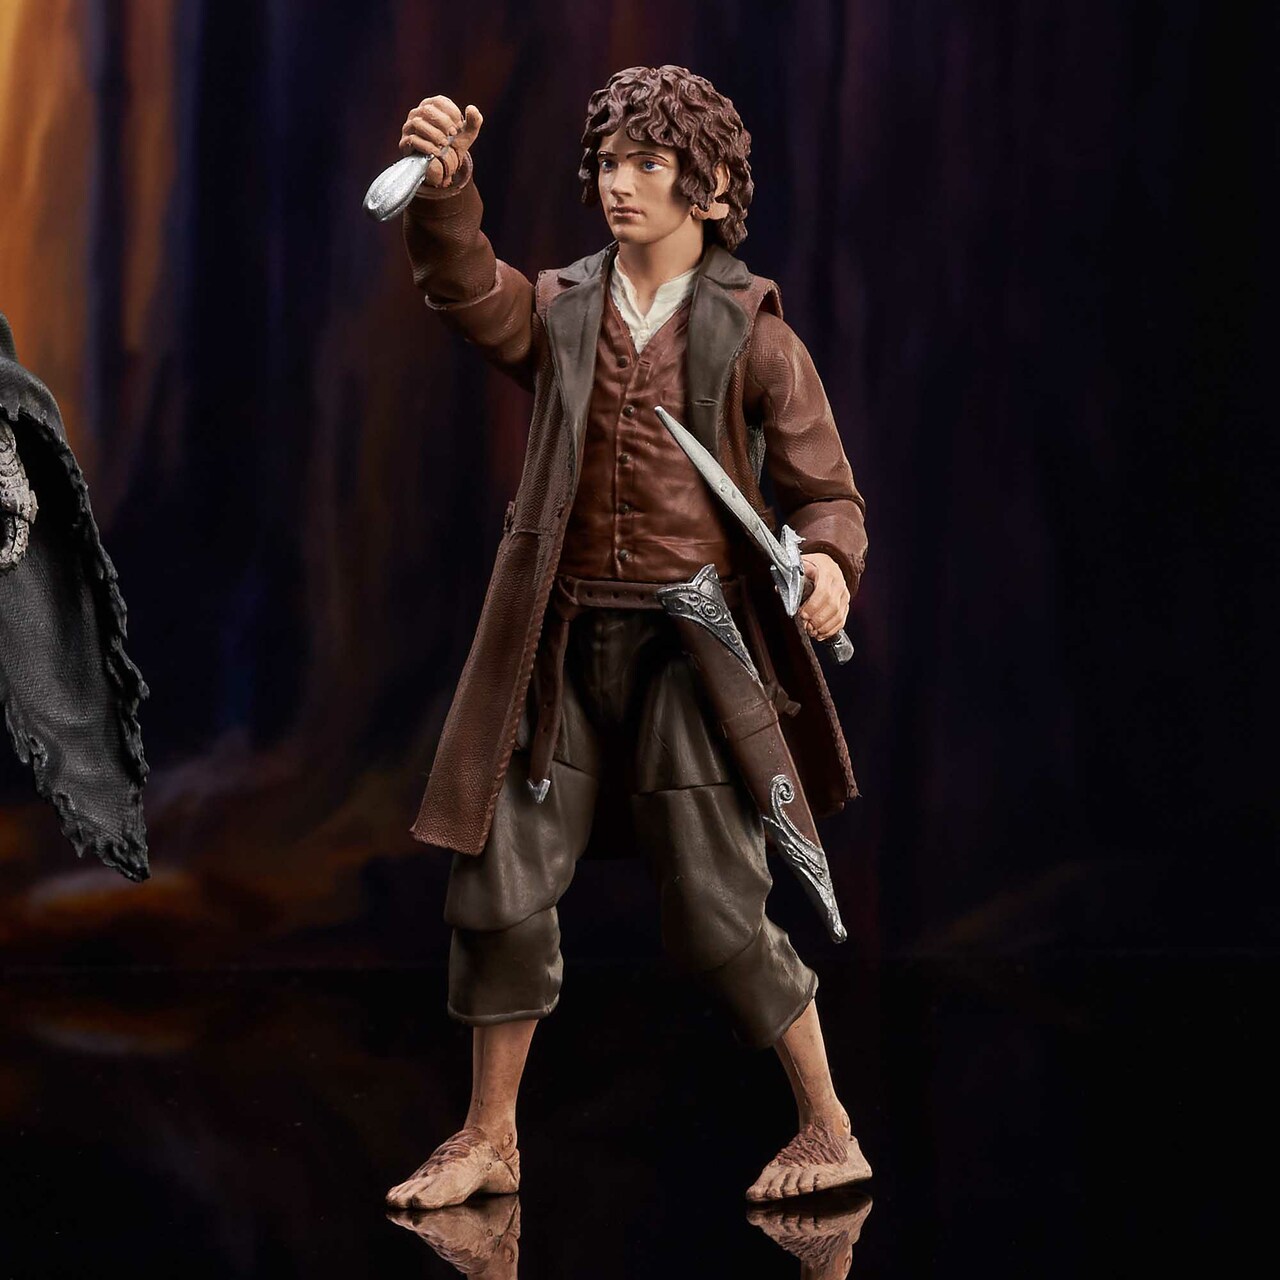 Lord of the Rings Select Actionfigur 18 cm Frodo  699788839010